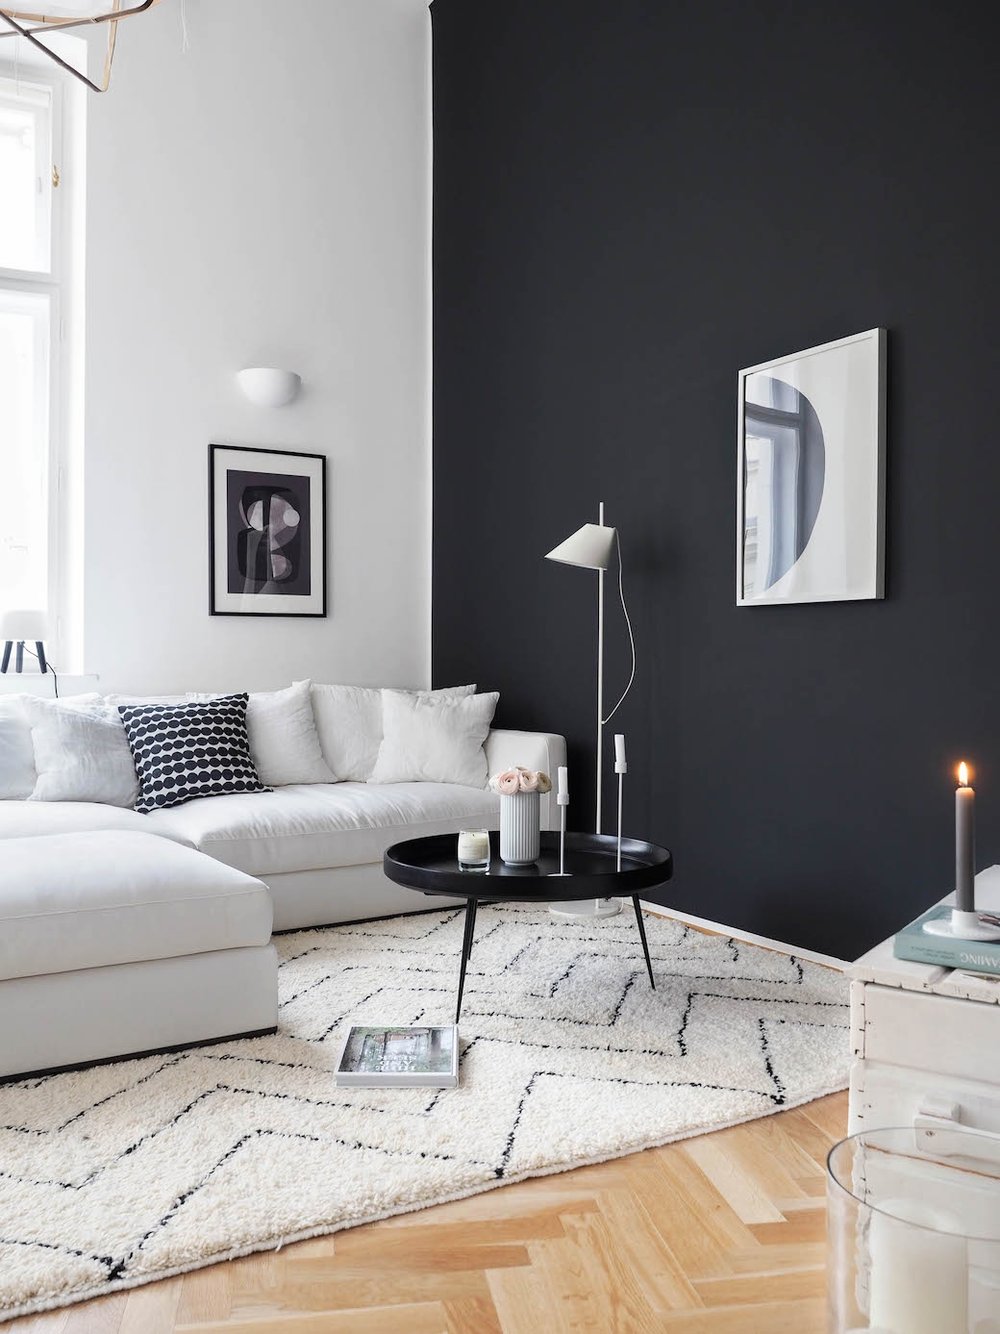  Wall Color: "Off Black“ from  Farrow&Ball . 